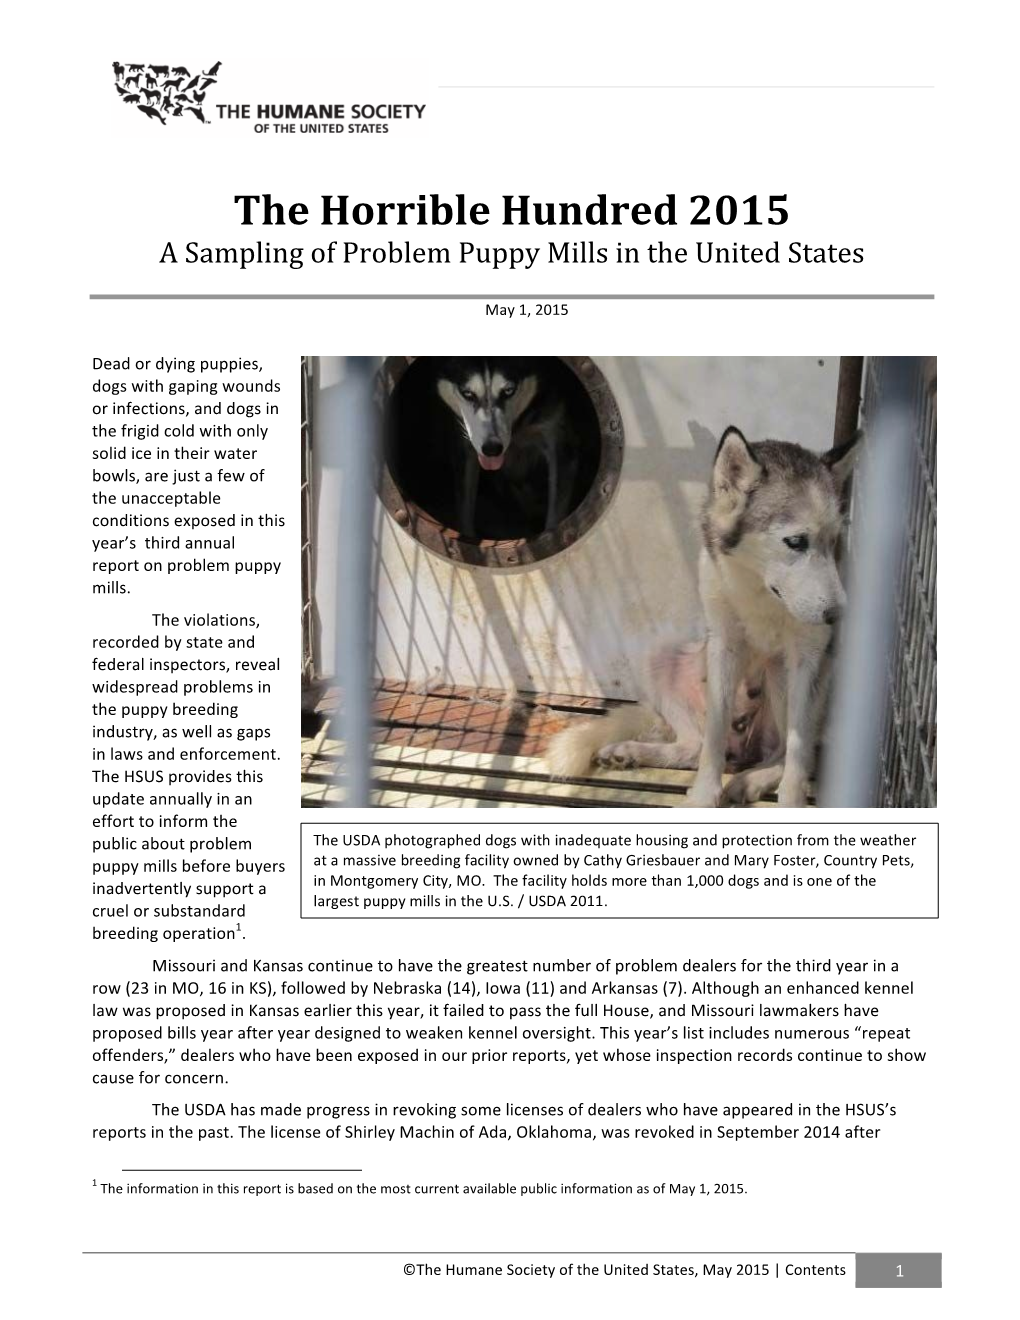 The Horrible Hundred 2015 a Sampling of Problem Puppy Mills in the United States